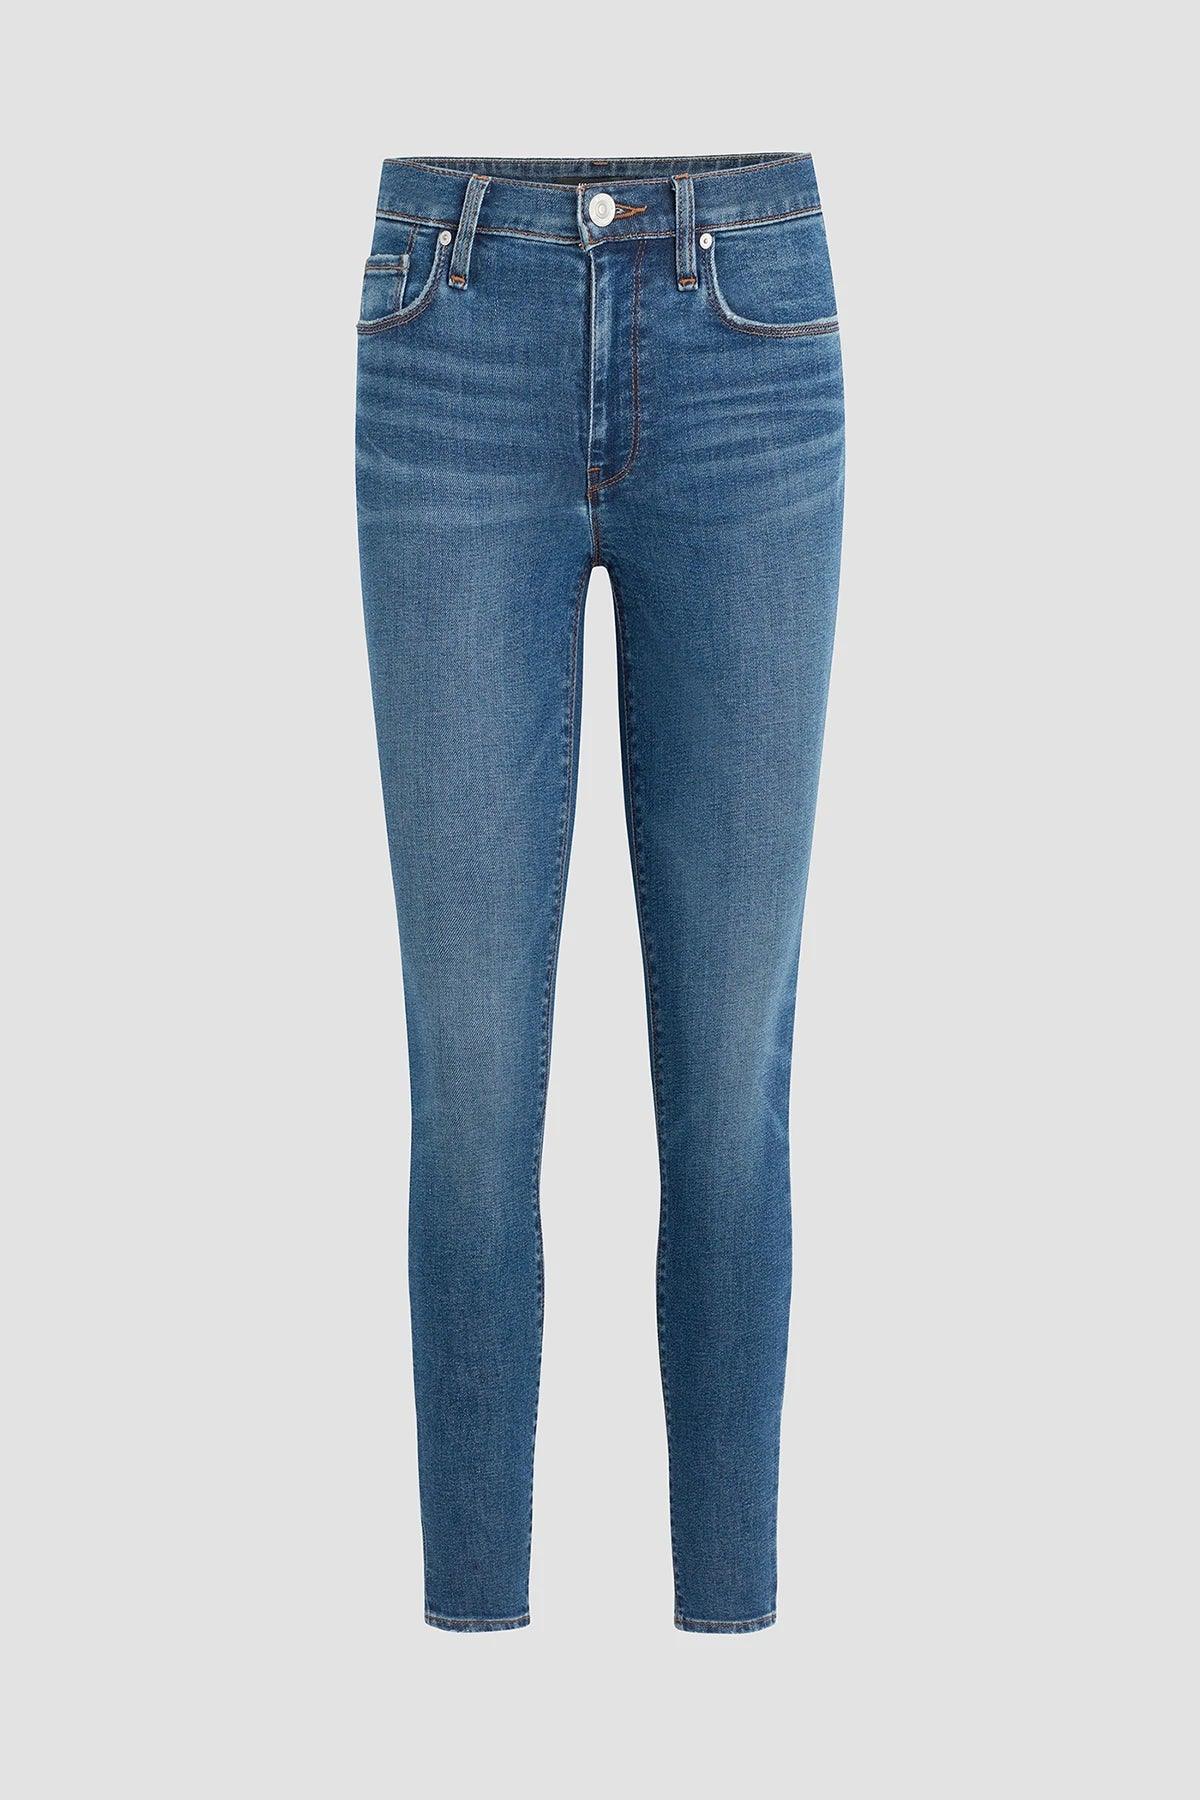 Barbara High Waist Super Skinny Ankle Jeans by Hudson - Haven